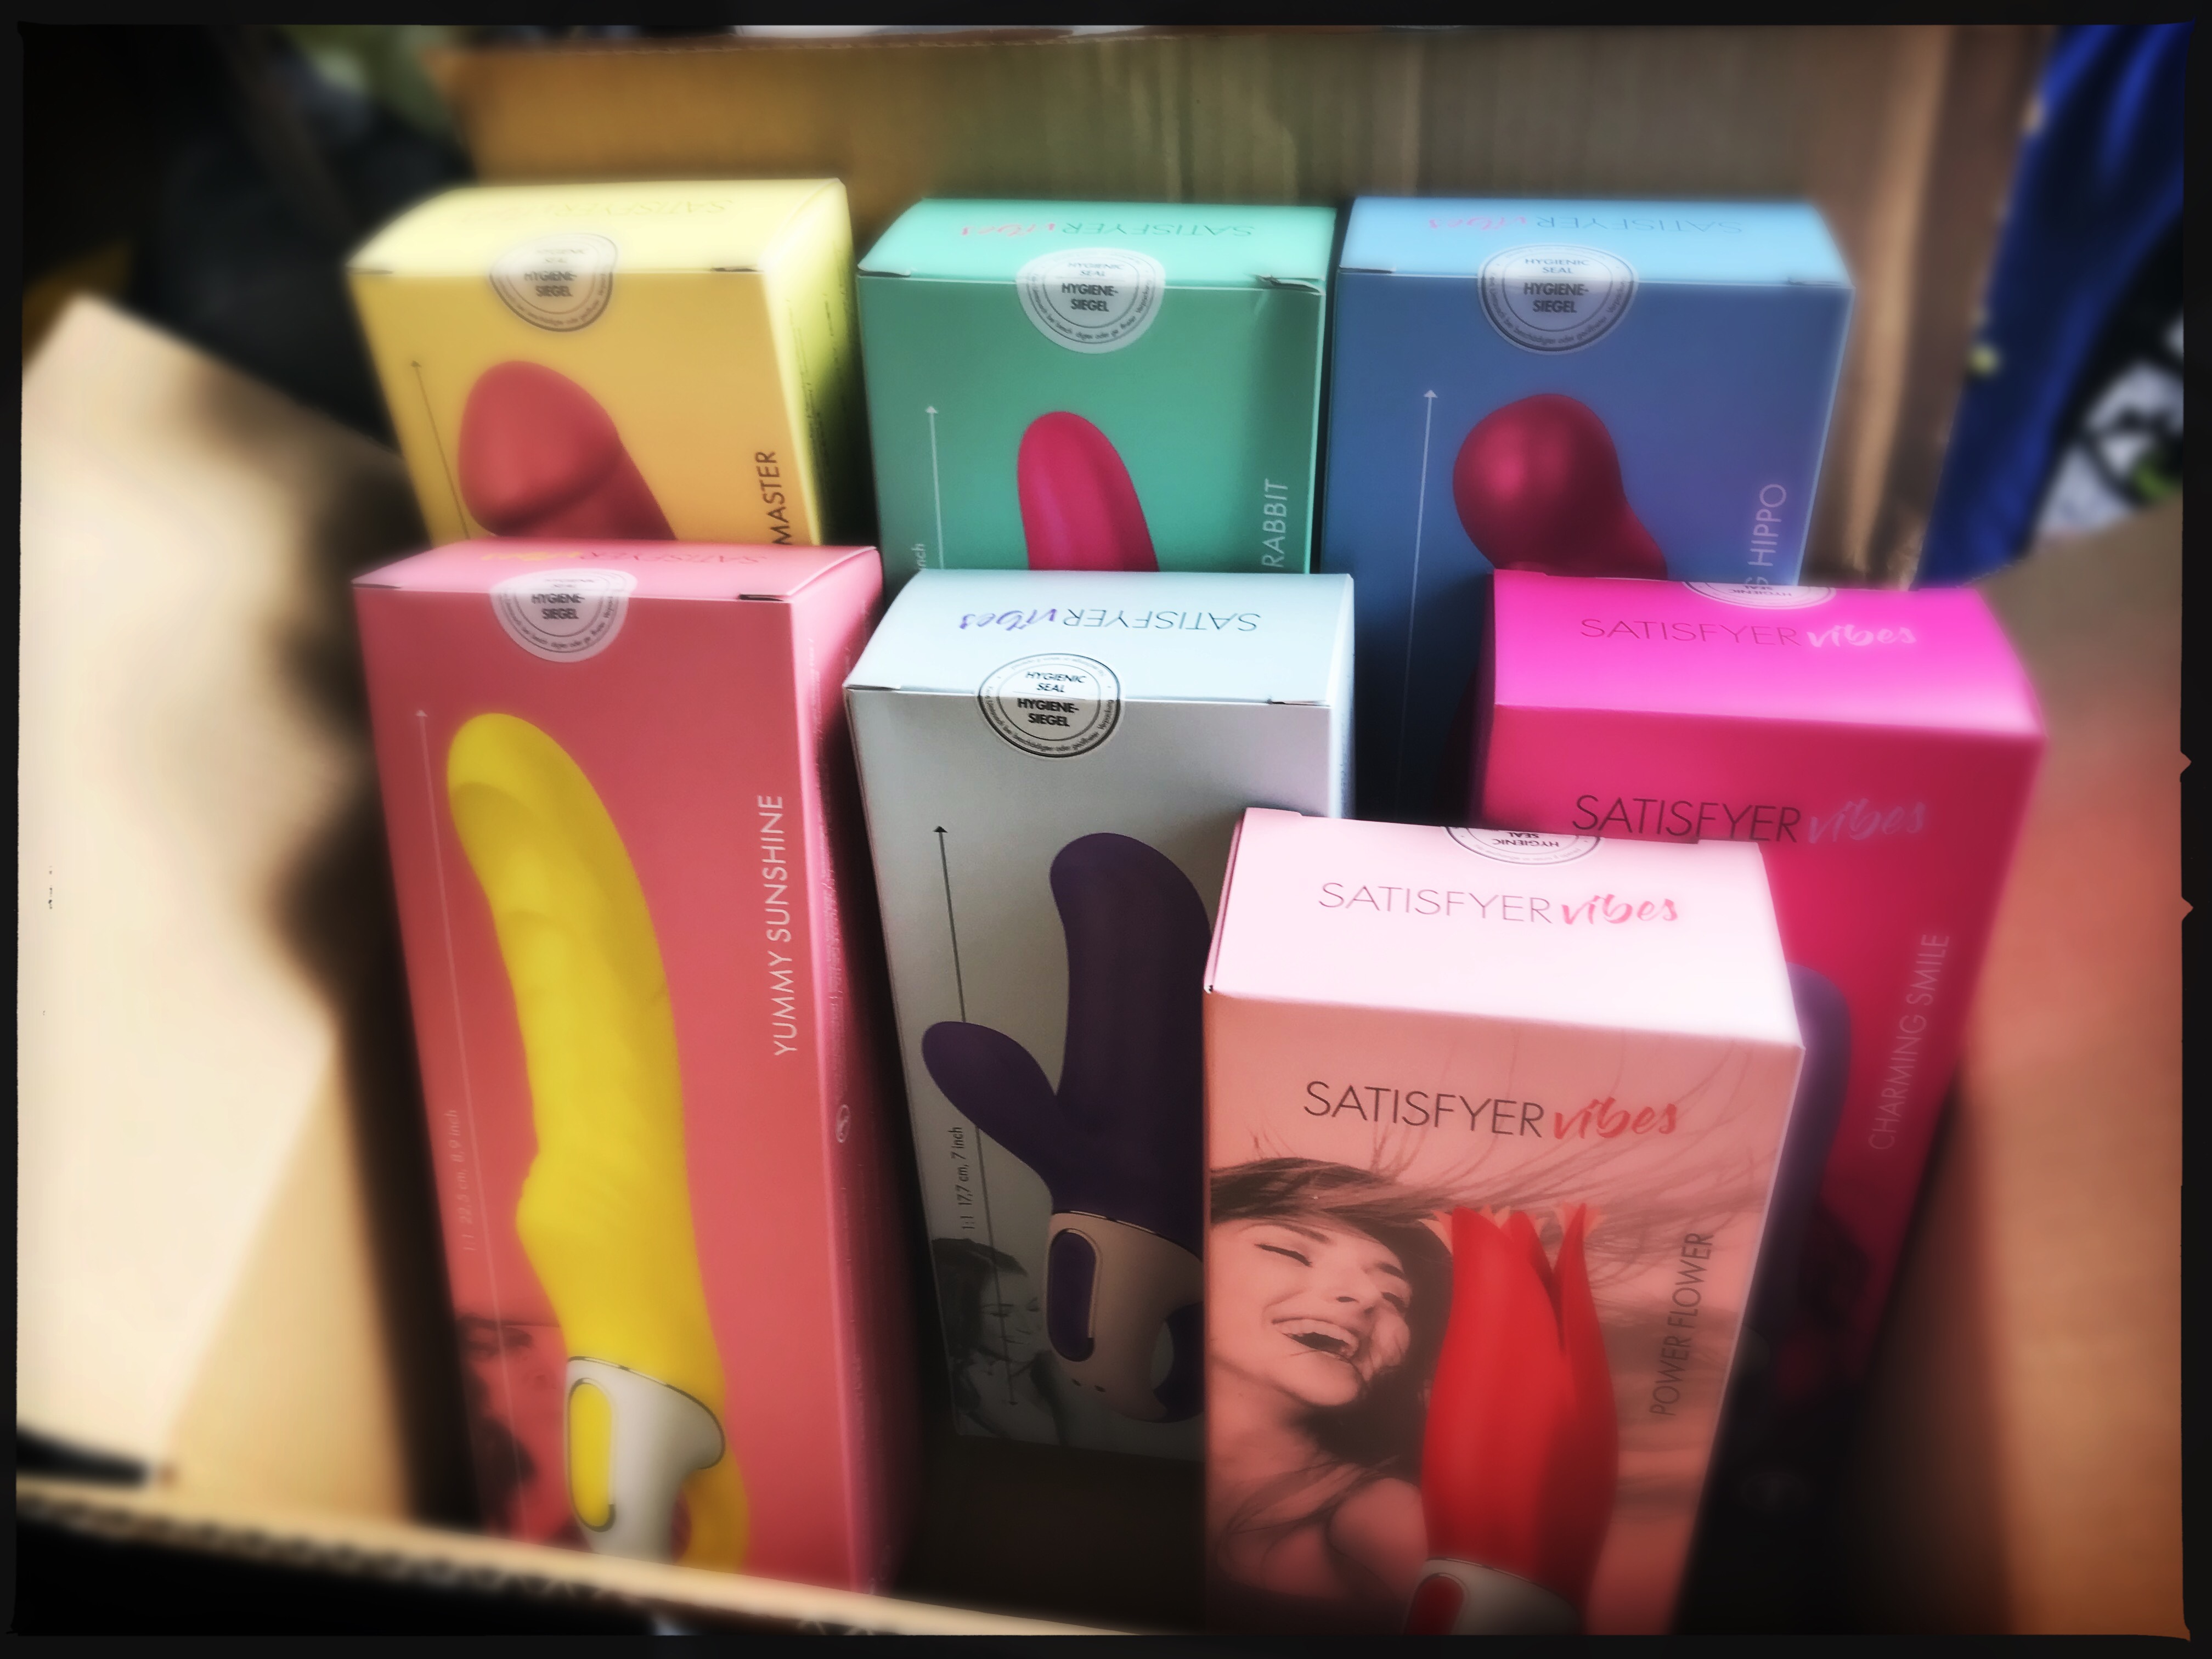 A photo of a cardboard box filled with colourful boxes of vibrators